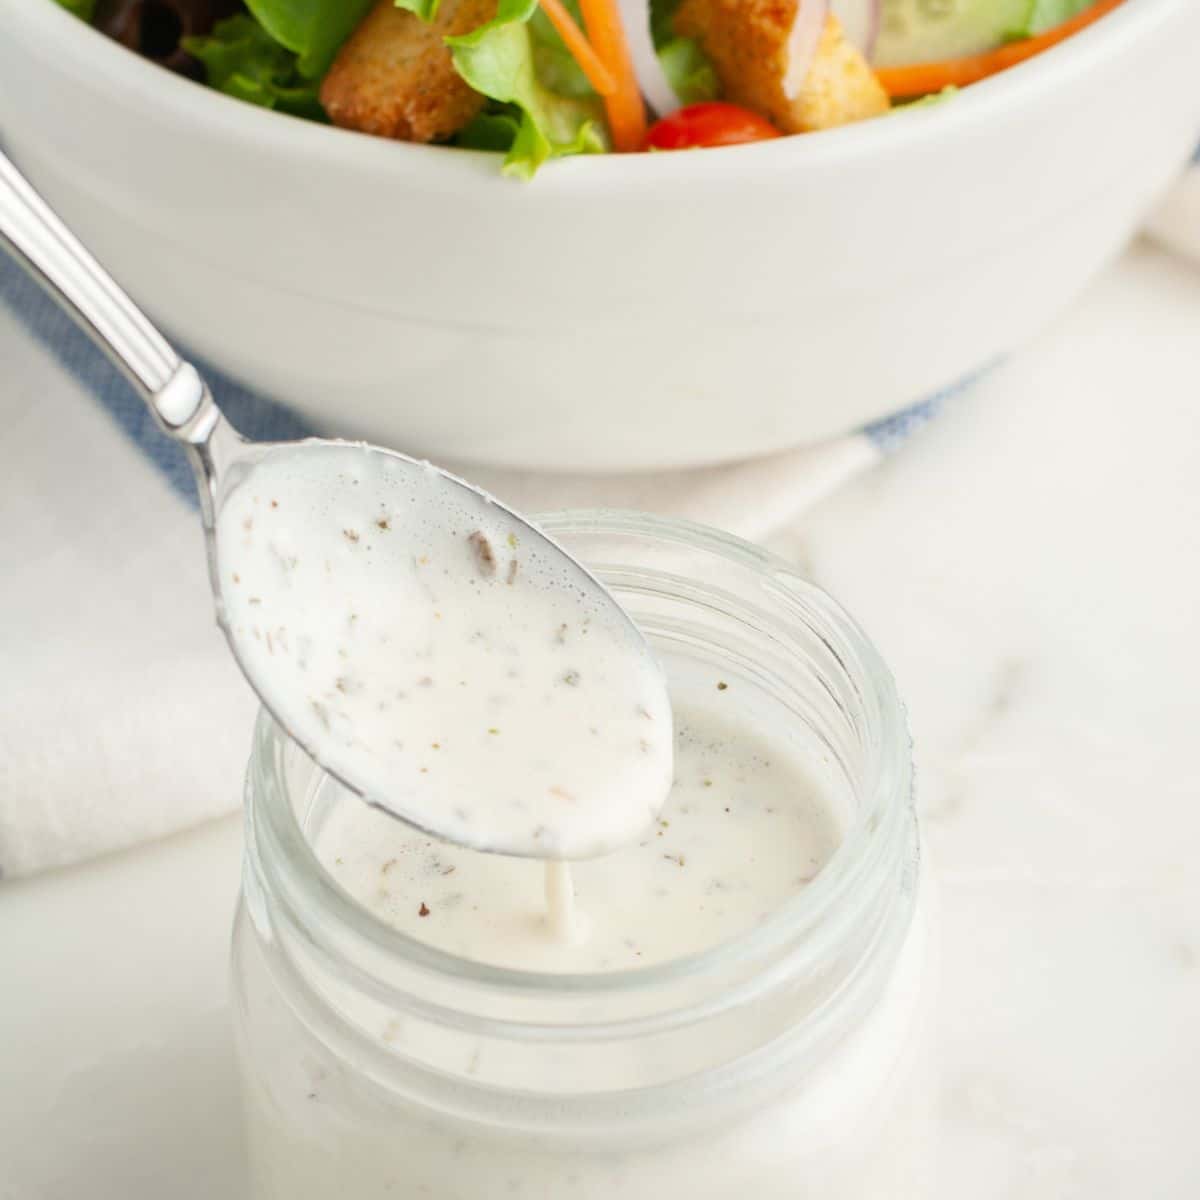 Spoon with salad dressing. 